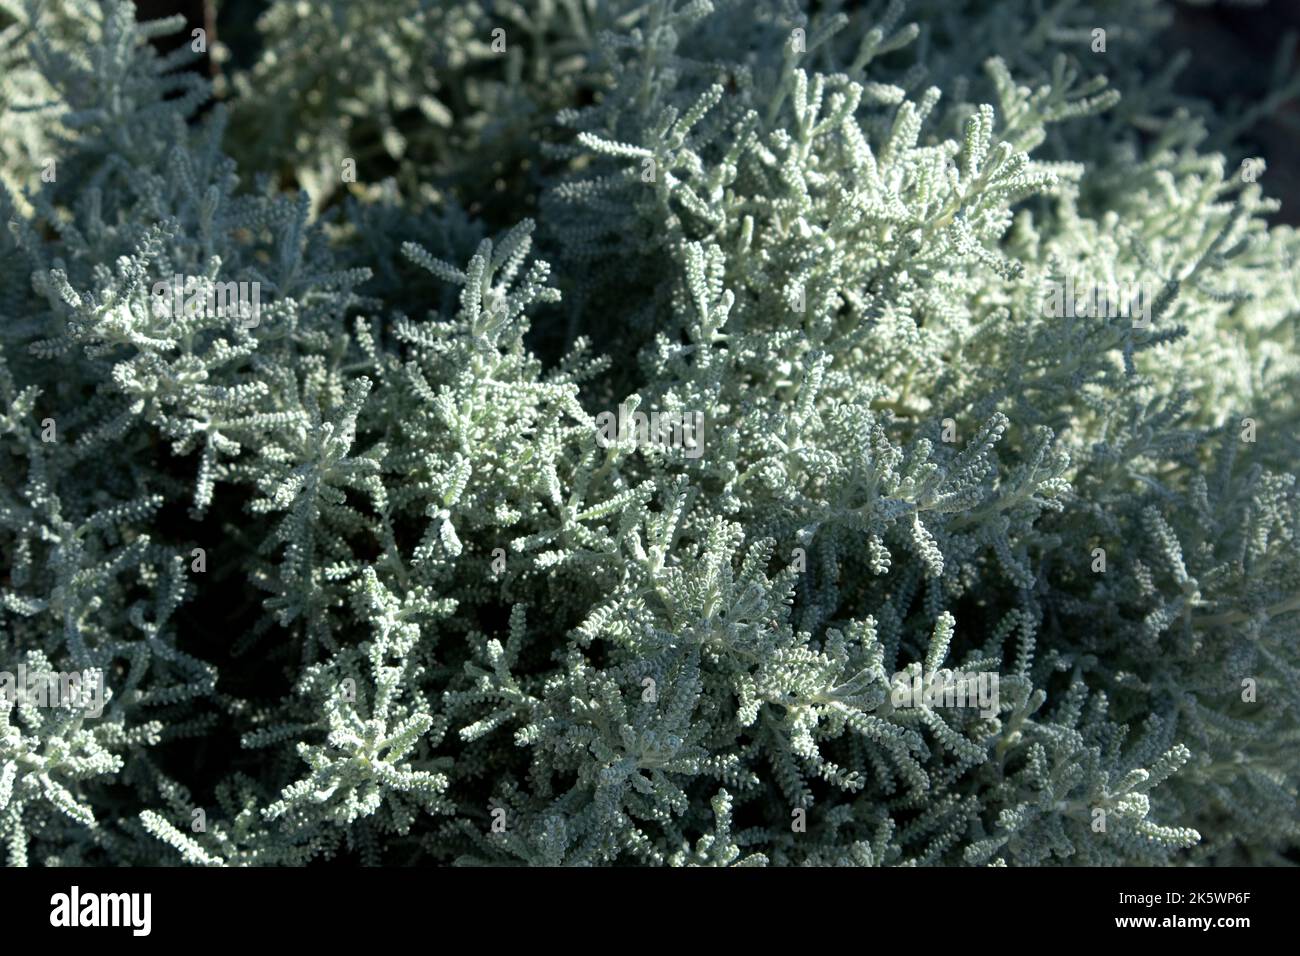 Gray Santolina or Lavender Cotton with silver foliage growing in the autumn garden. Selective focus with blured background Stock Photo